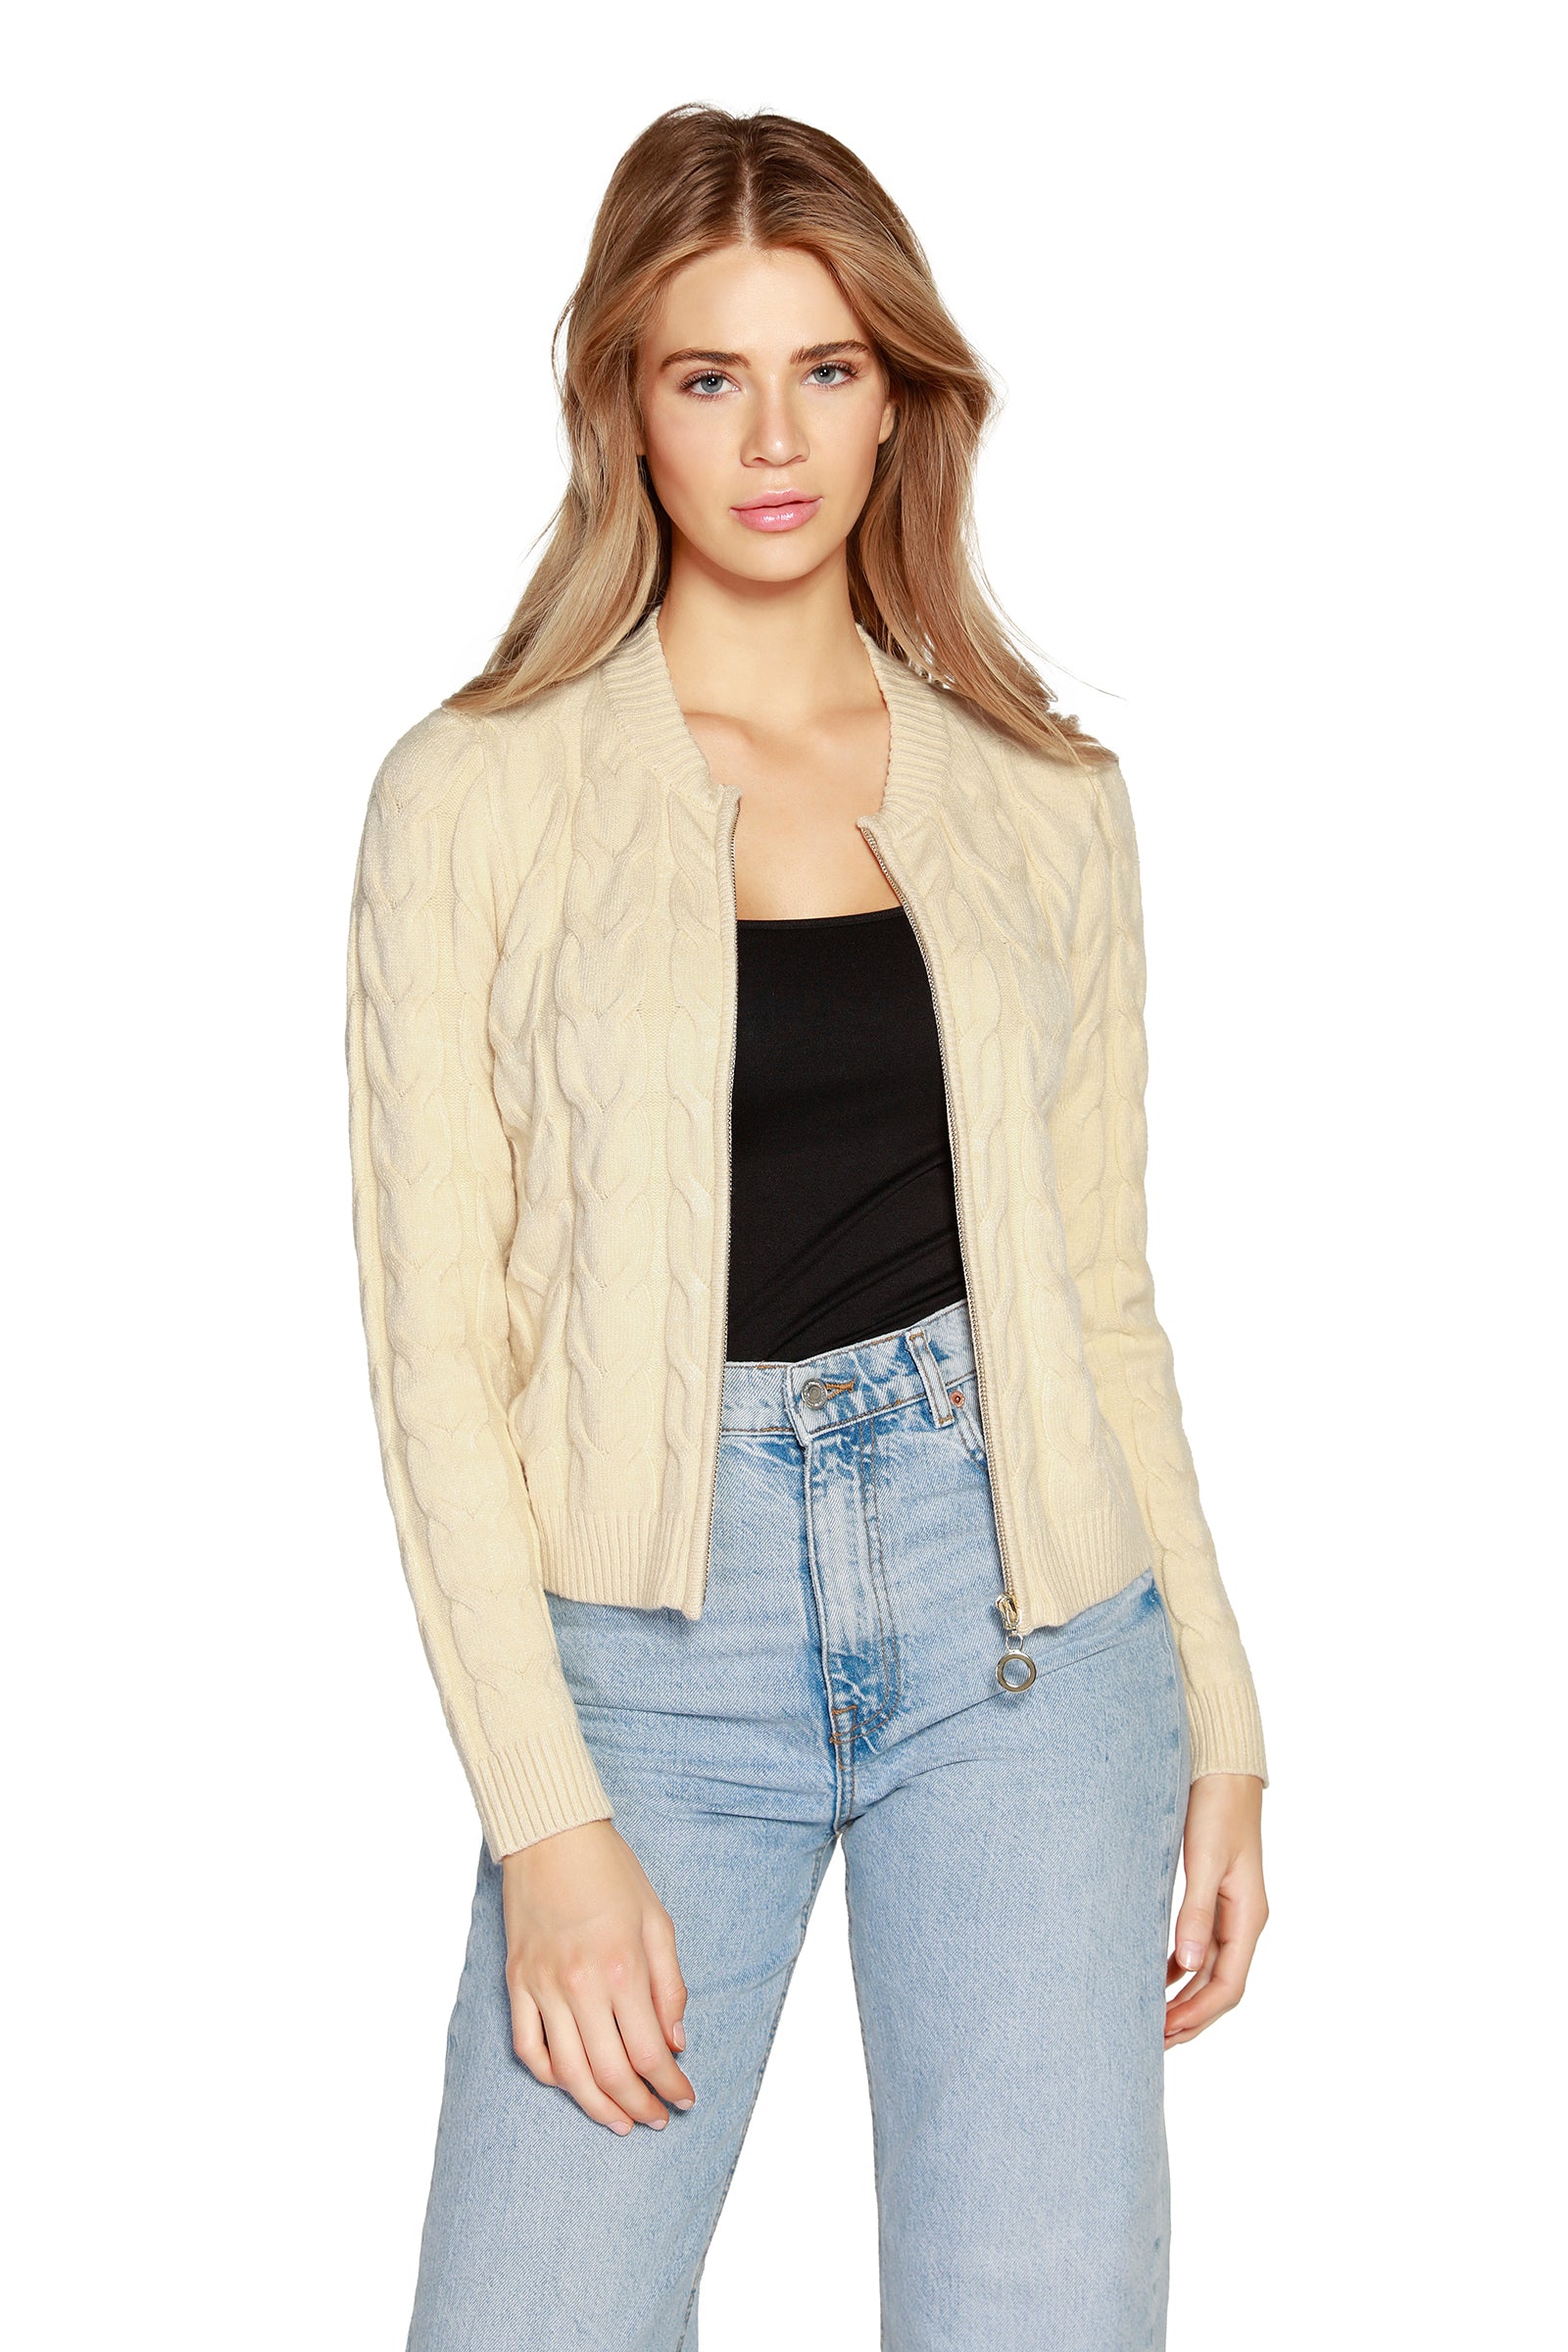 Women's Cable Knit Zip Up Cardigan